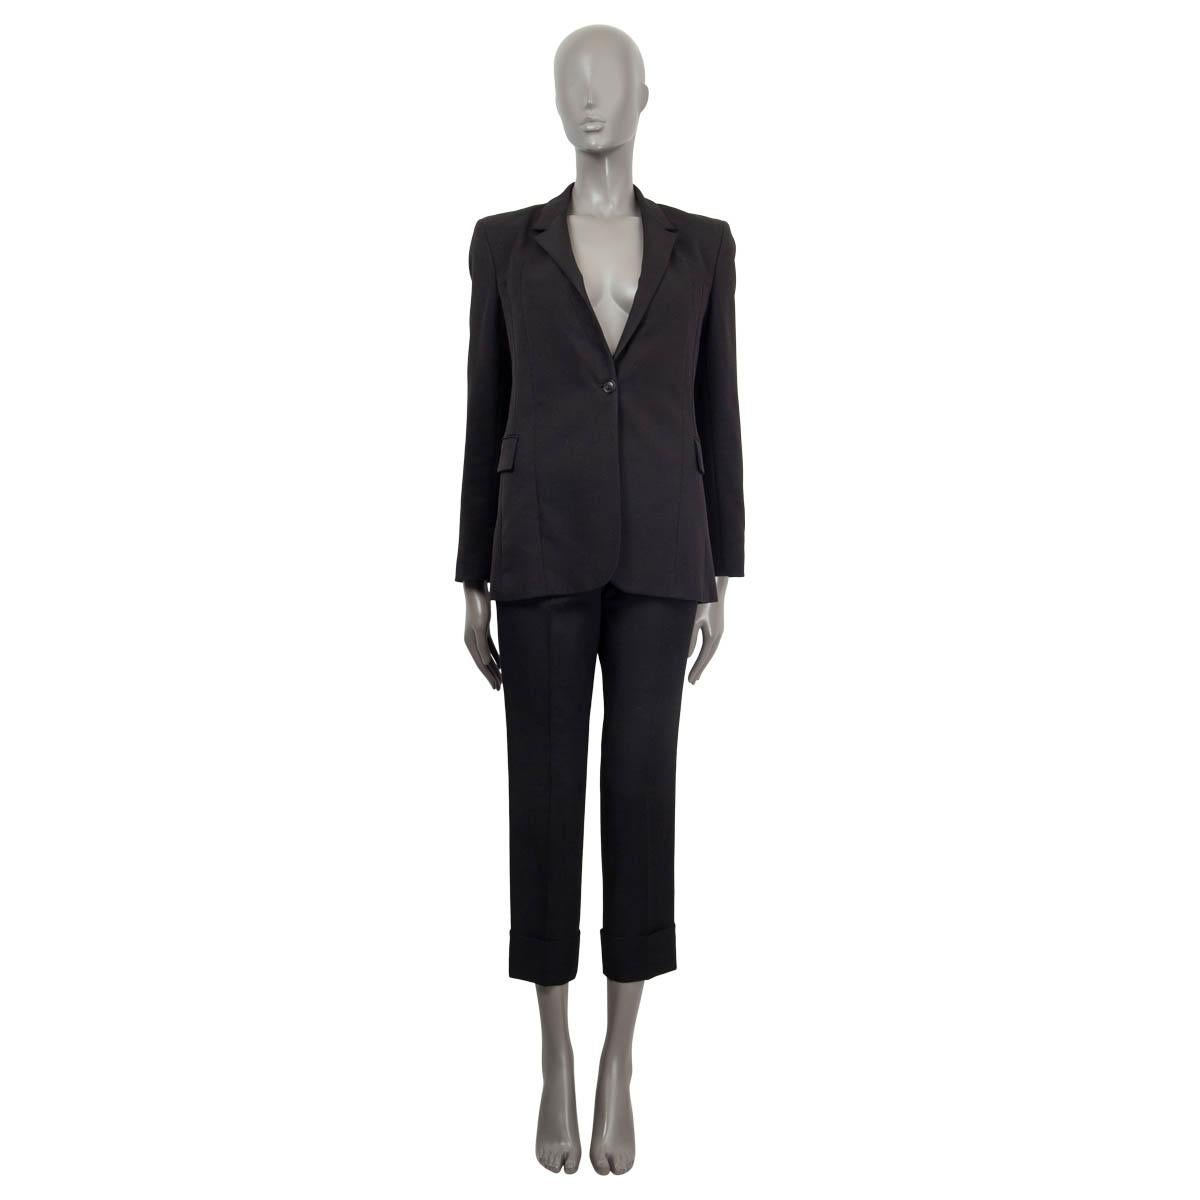 100% authentic Gucci classic one-button blazer in black polyester (100%) with two flap pockets on the side and a slit back. Lined in black viscose (57%) and polyester (43%). Has been worn  and is in excellent condition. 

Measurements
Tag